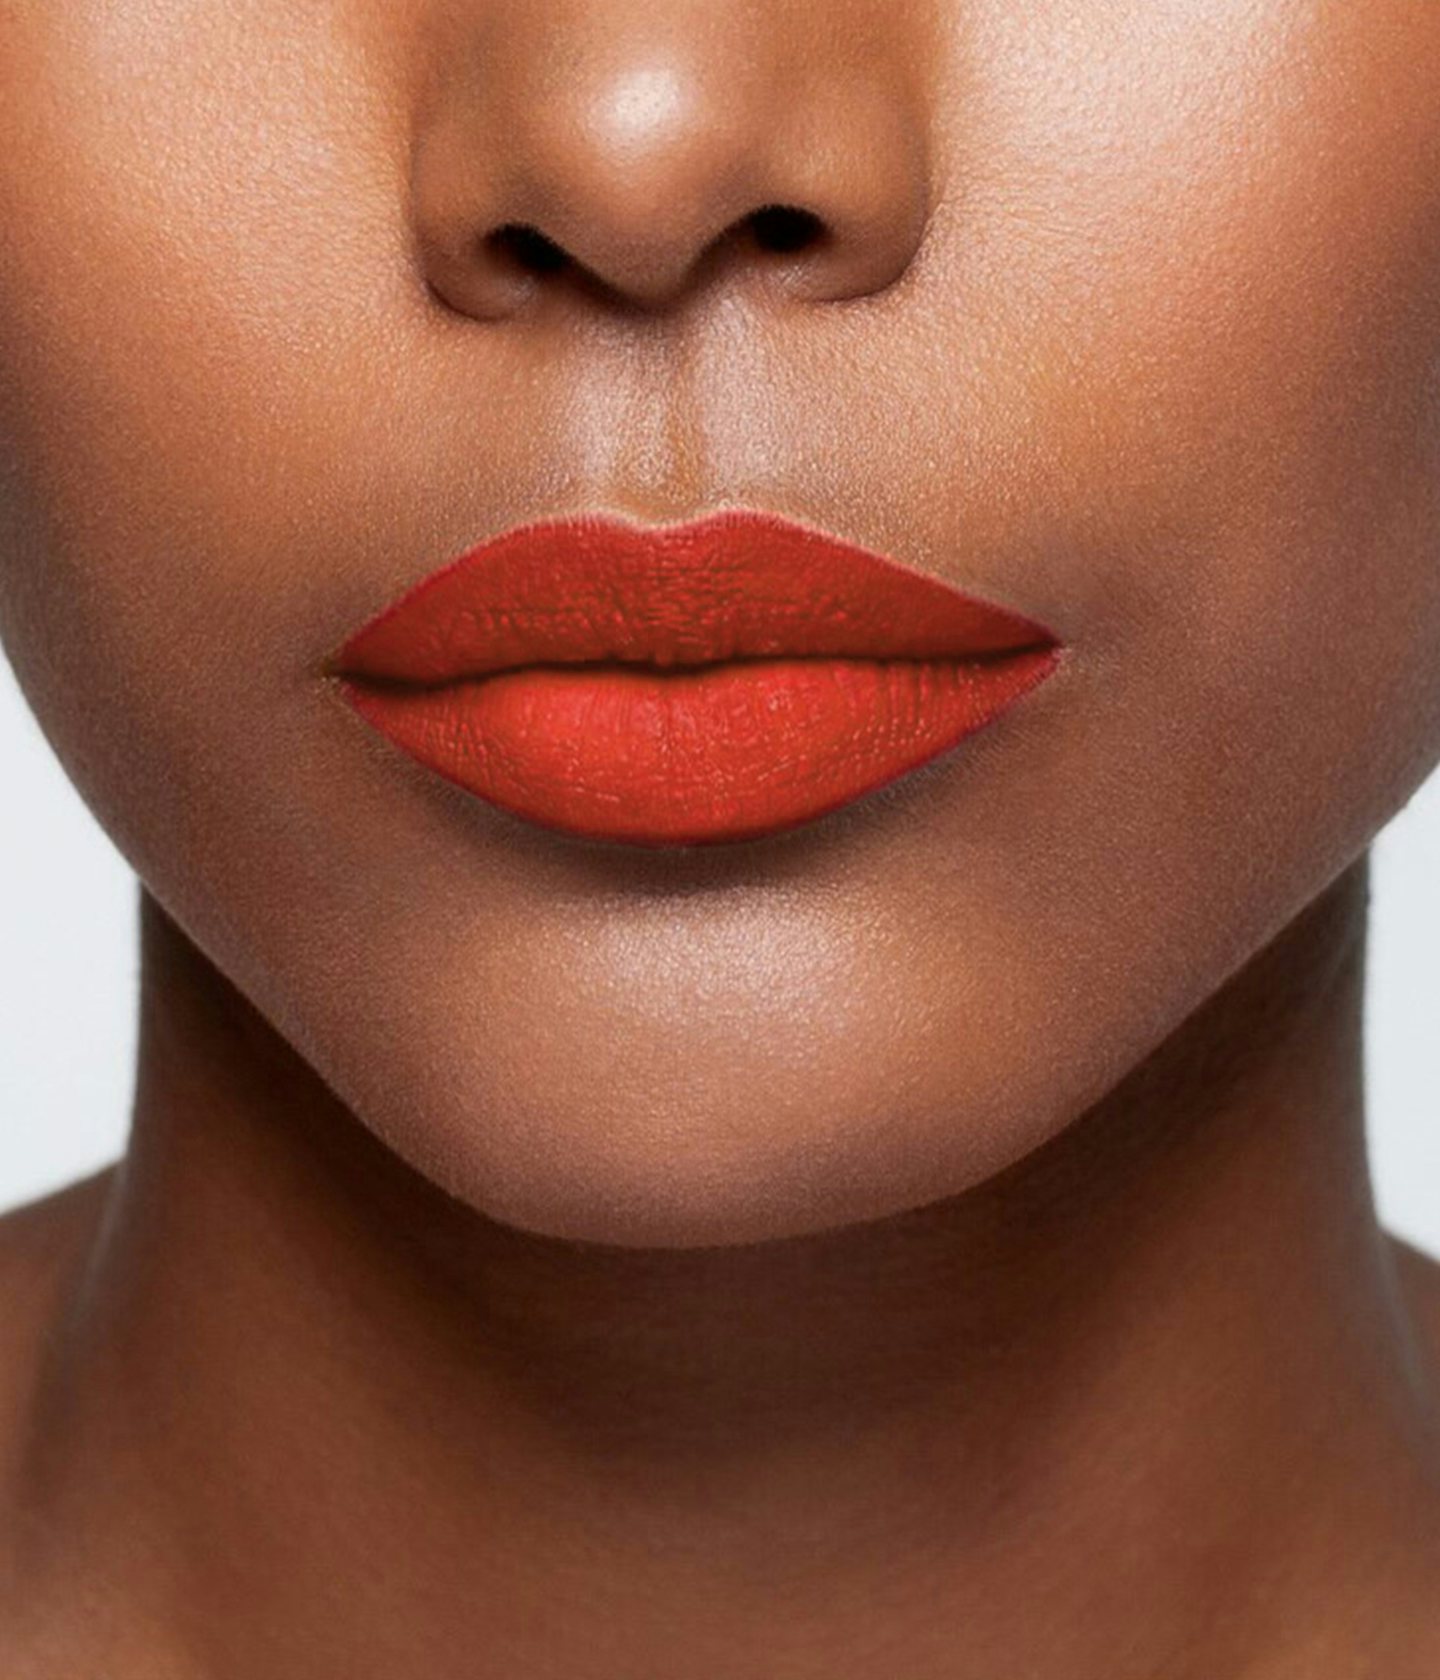 La bouche rouge The Red Andreea lipstick shade on the lips of a dark skin model